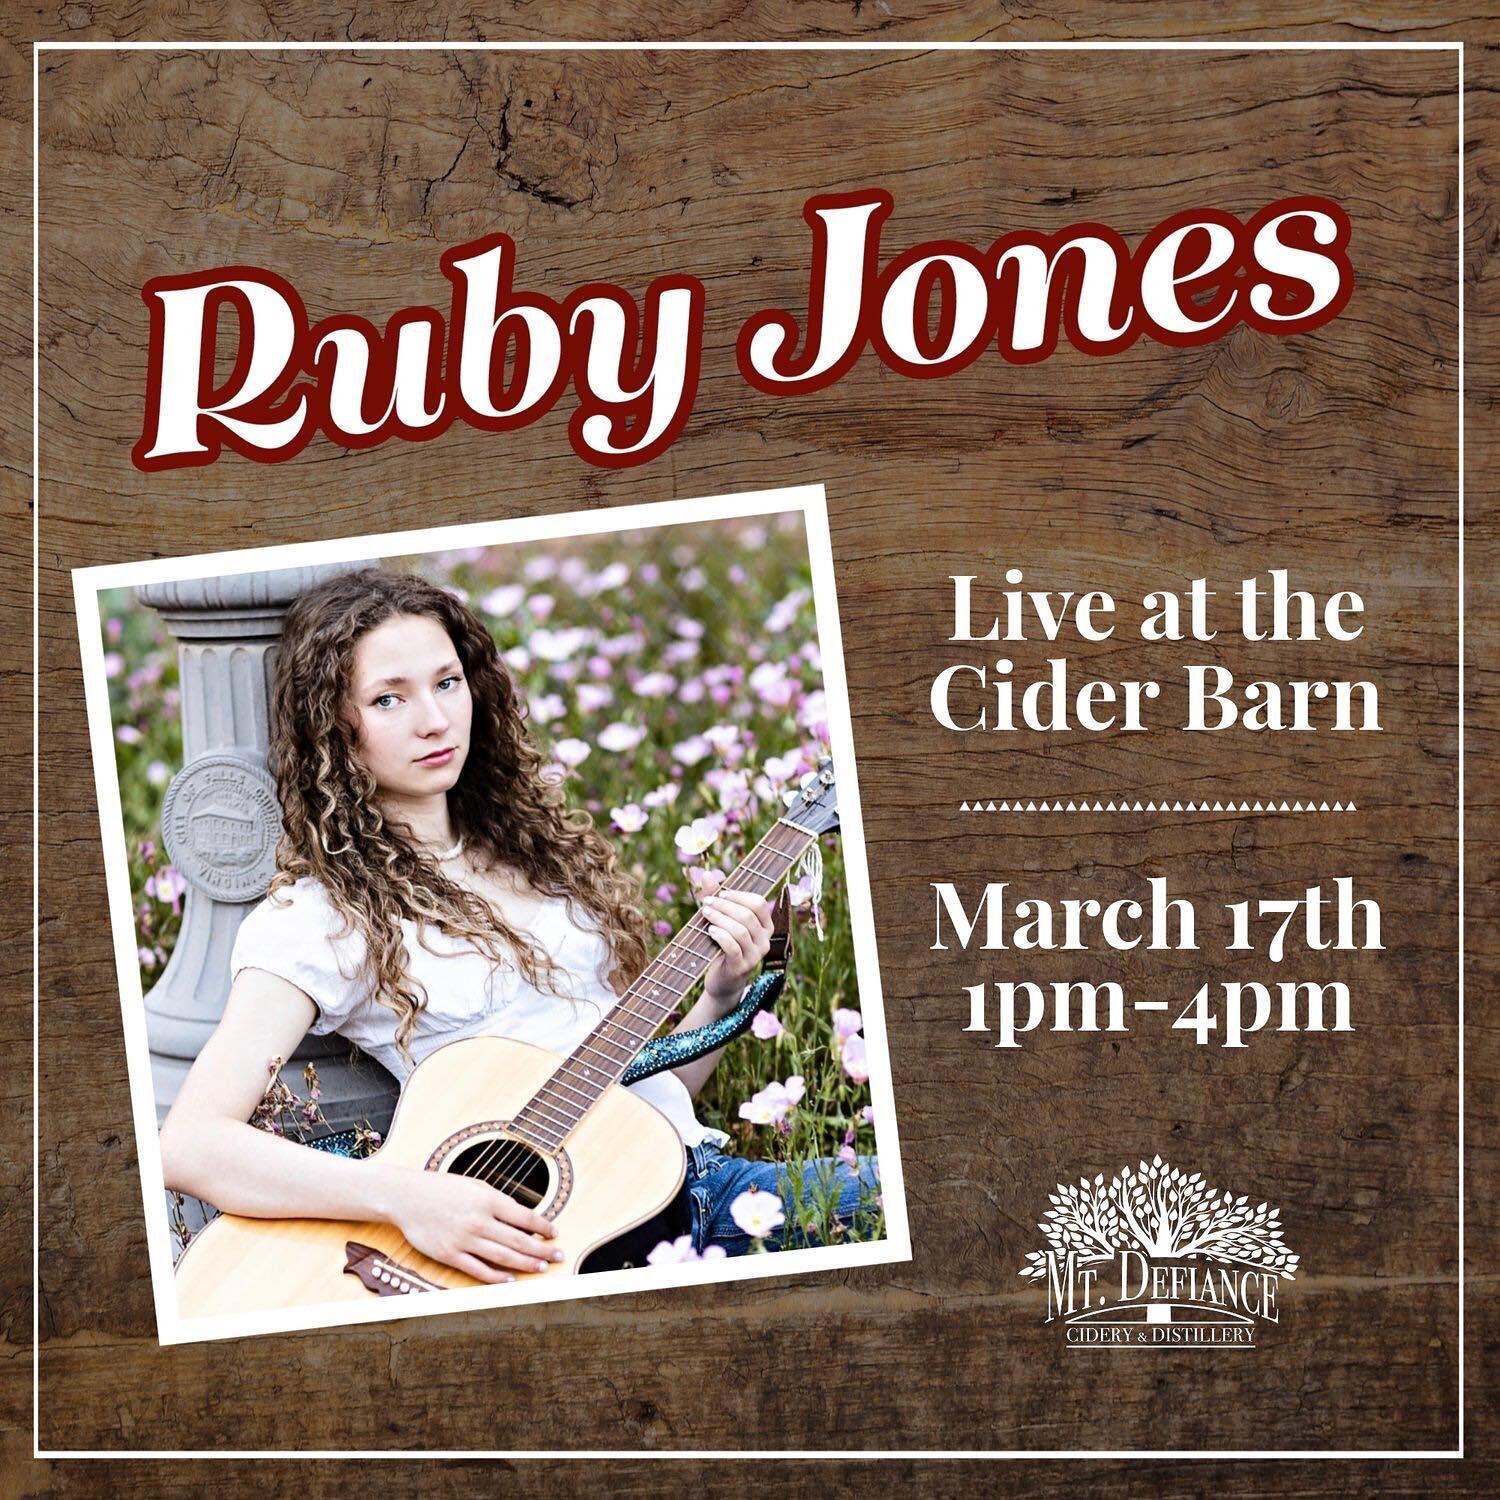 We are excited to have @thisisrubyjones at the Cider Barn Sunday 3/17! 

Join us for live music Sunday from 1pm-4pm, cider on tap &amp; good times for St. Patrick&rsquo;s Day. ☘️

#loudoncounty #middeburgva